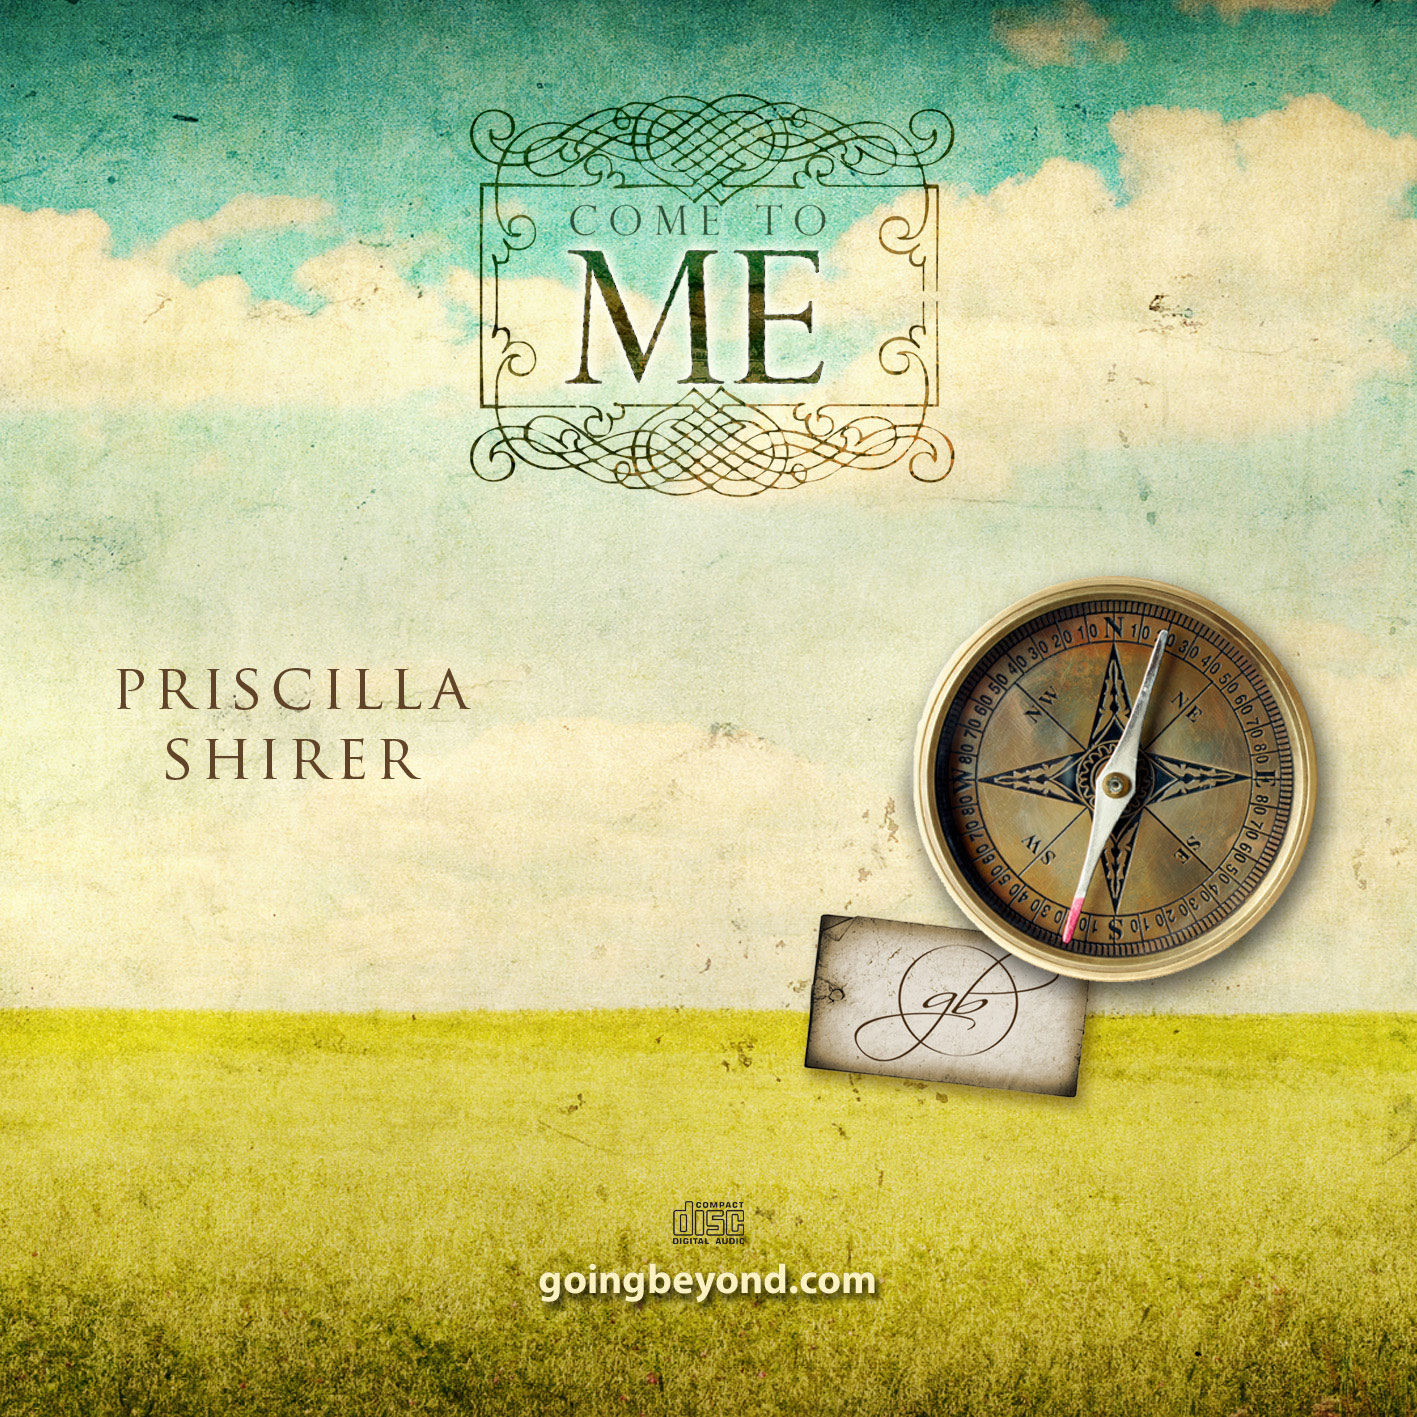 Come to Me with Priscilla Shirer